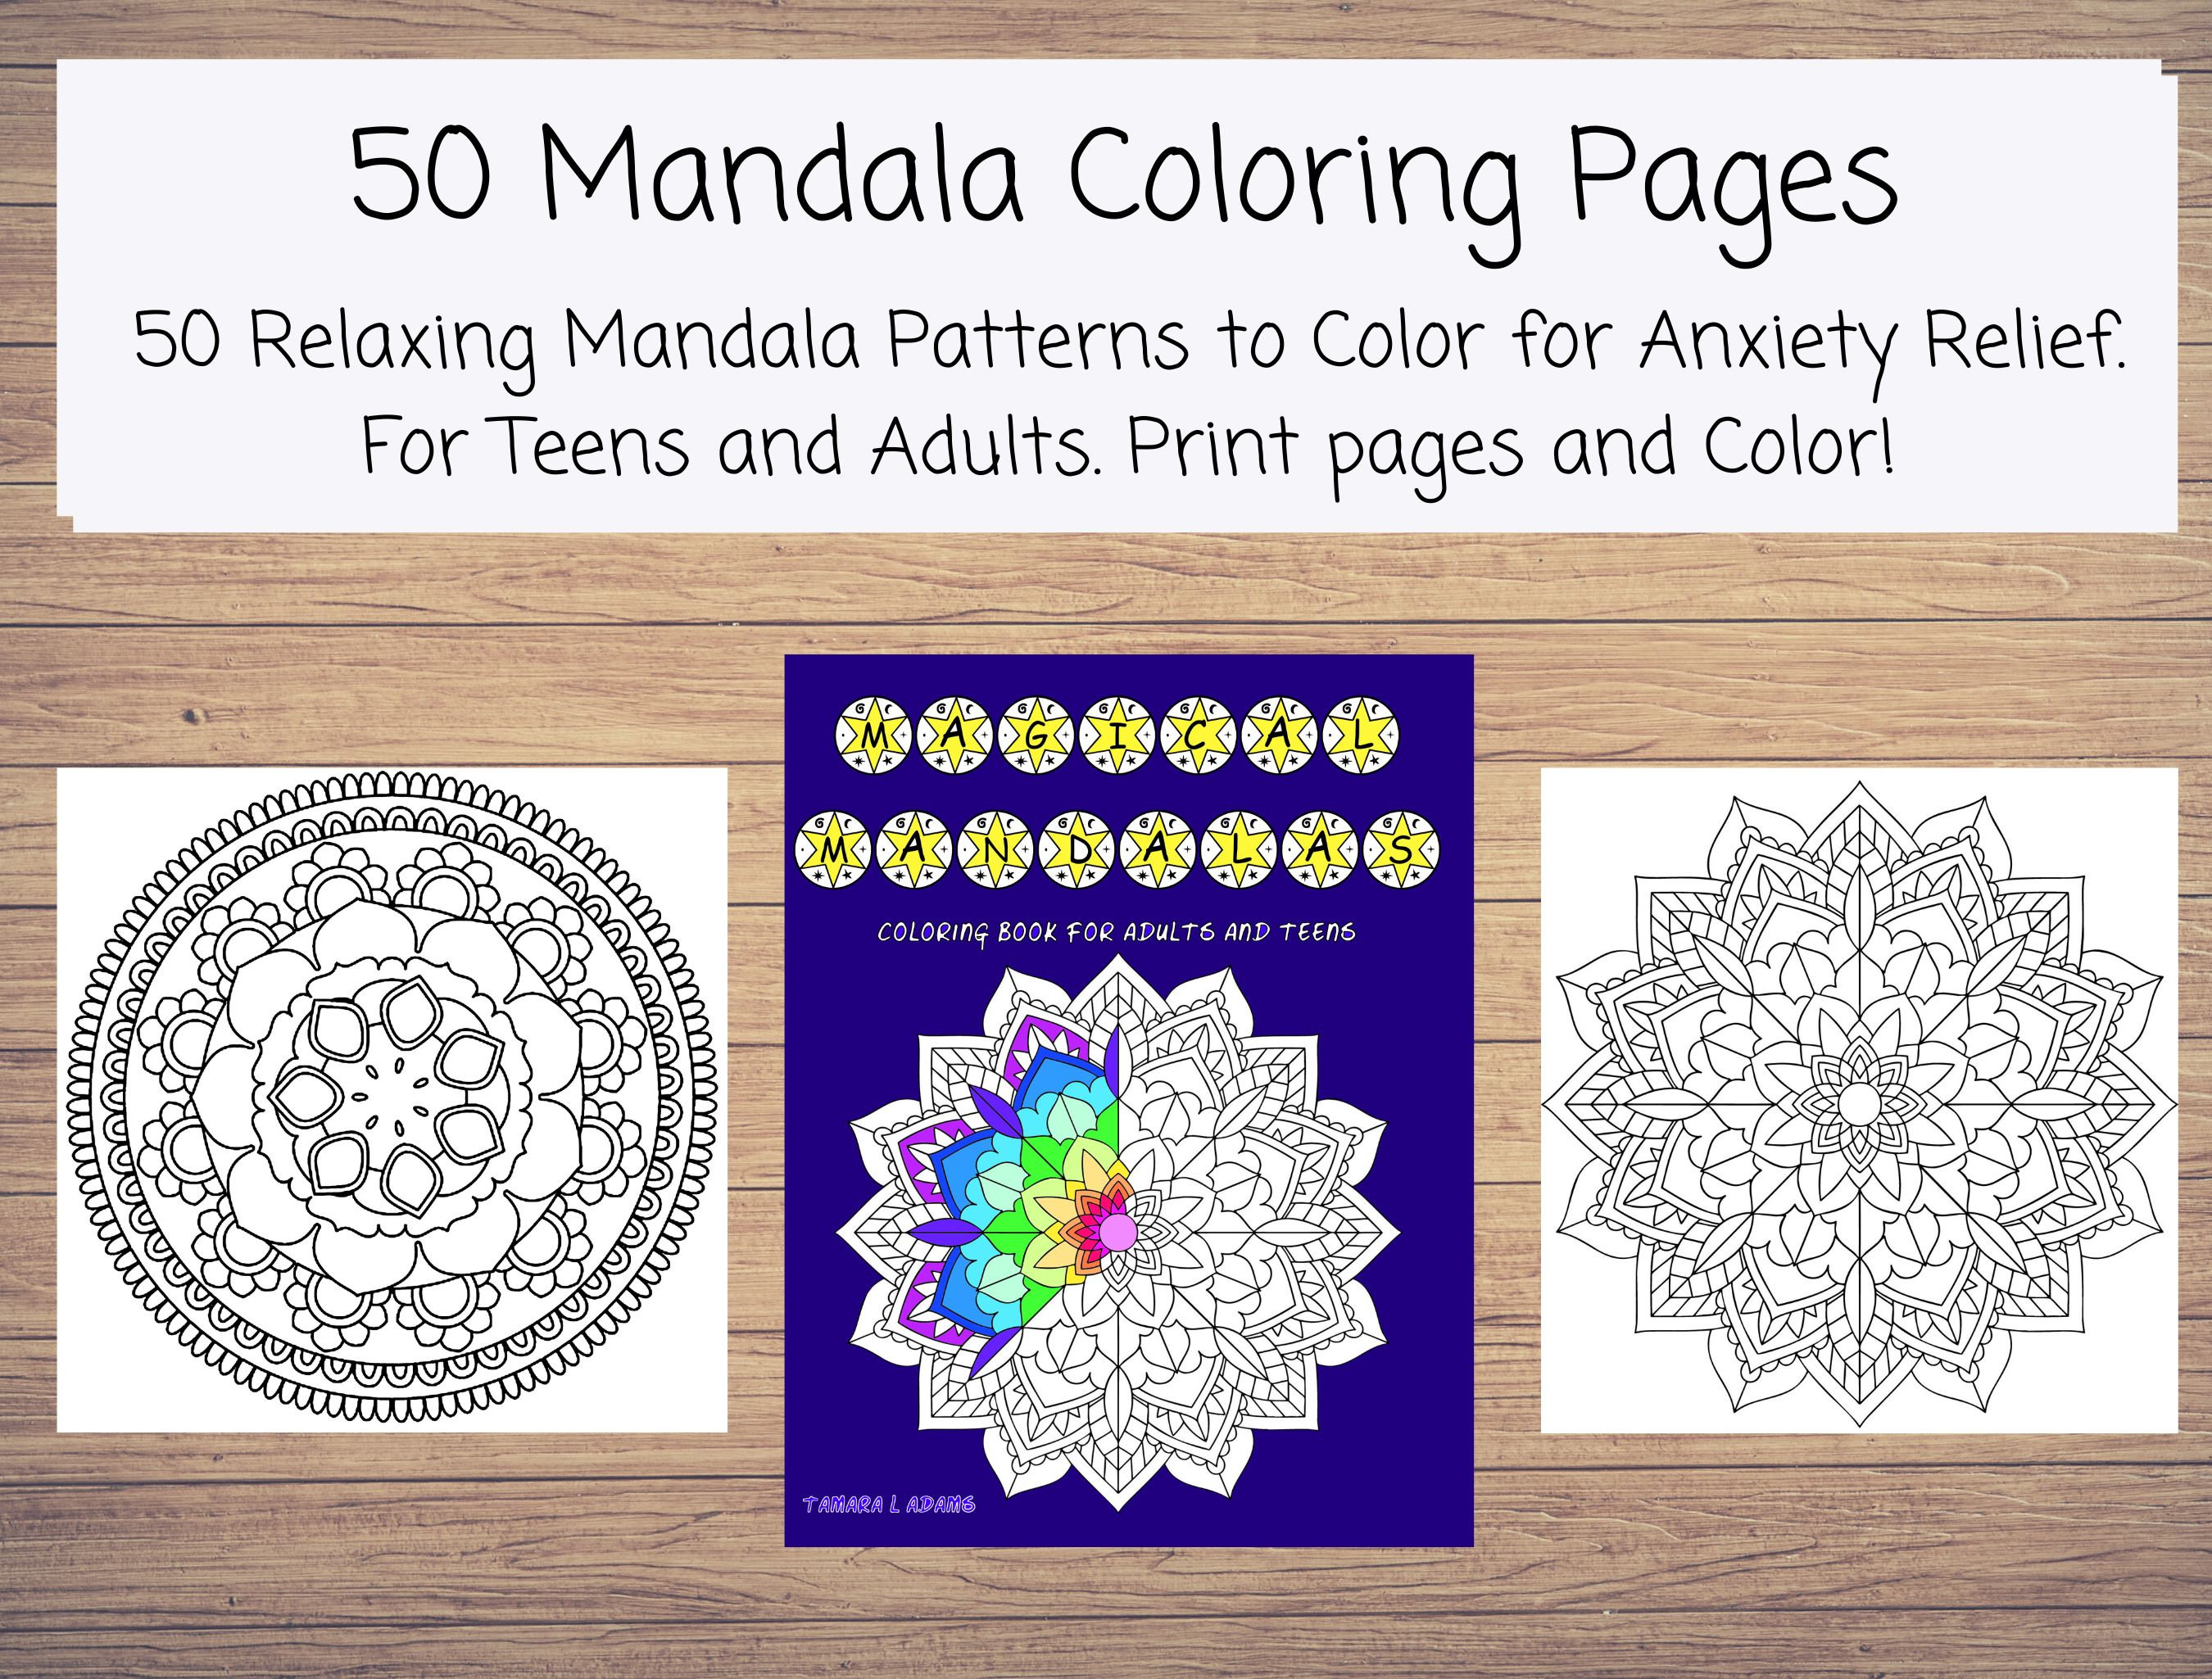 Stunning Patterns Adult Coloring Book Mandala Coloring Pages